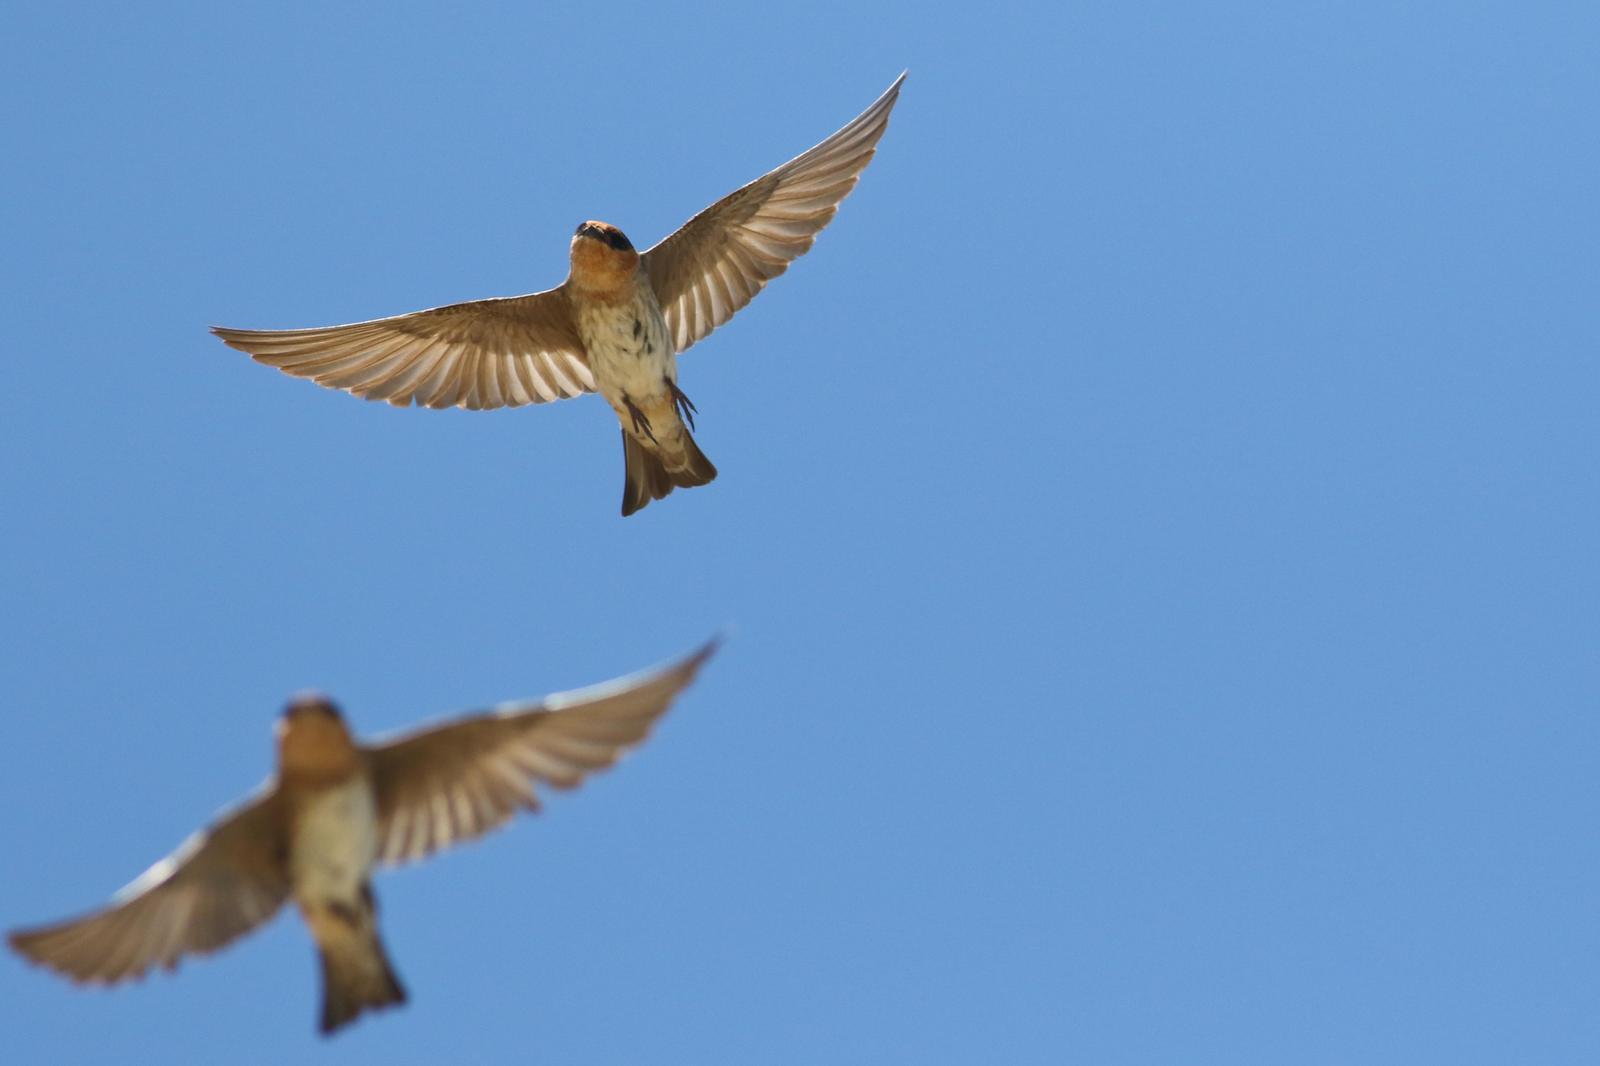 Cave Swallow (Texas) Photo by Tom Ford-Hutchinson